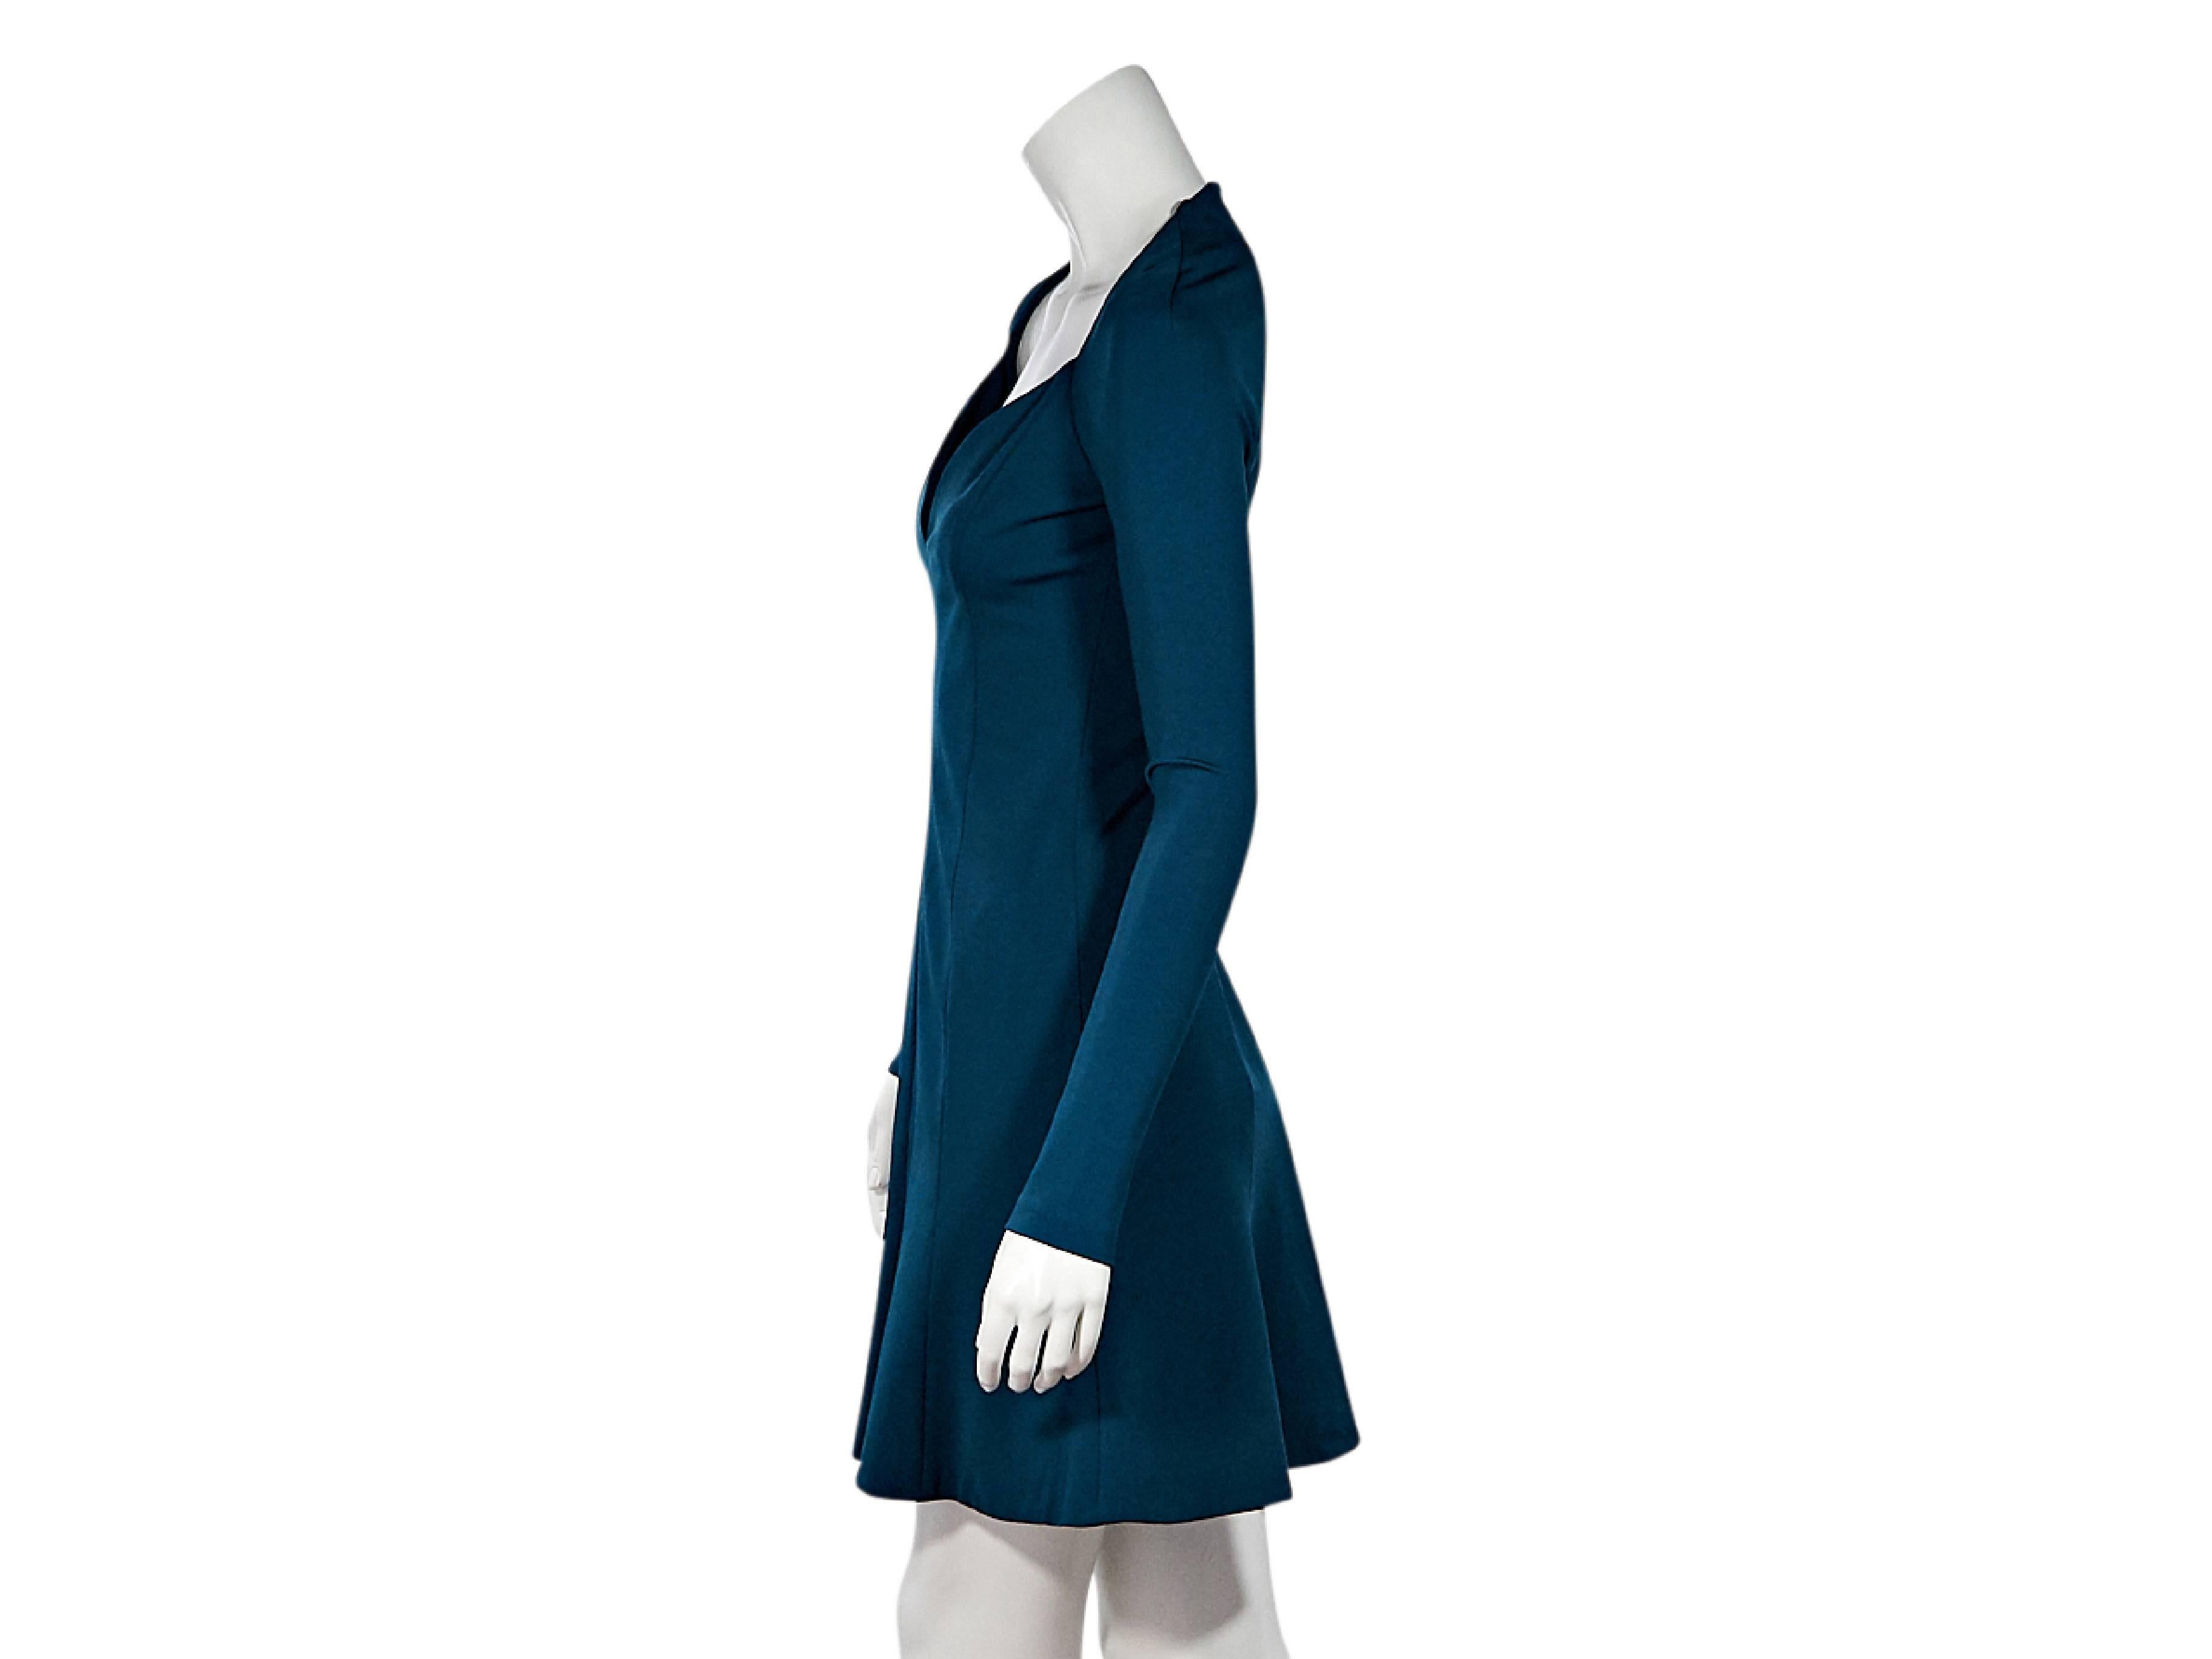 Product details:  Teal long-sleeve mini dress by Cushnie Et Ochs.  Sweetheart neckline.  Long sleeves.  Concealed back zip closure.  Seams create a flattering silhouette. Flared skirting. 
Condition: Pre-owned. Very good.  
Est. Retail $ 1,395.00